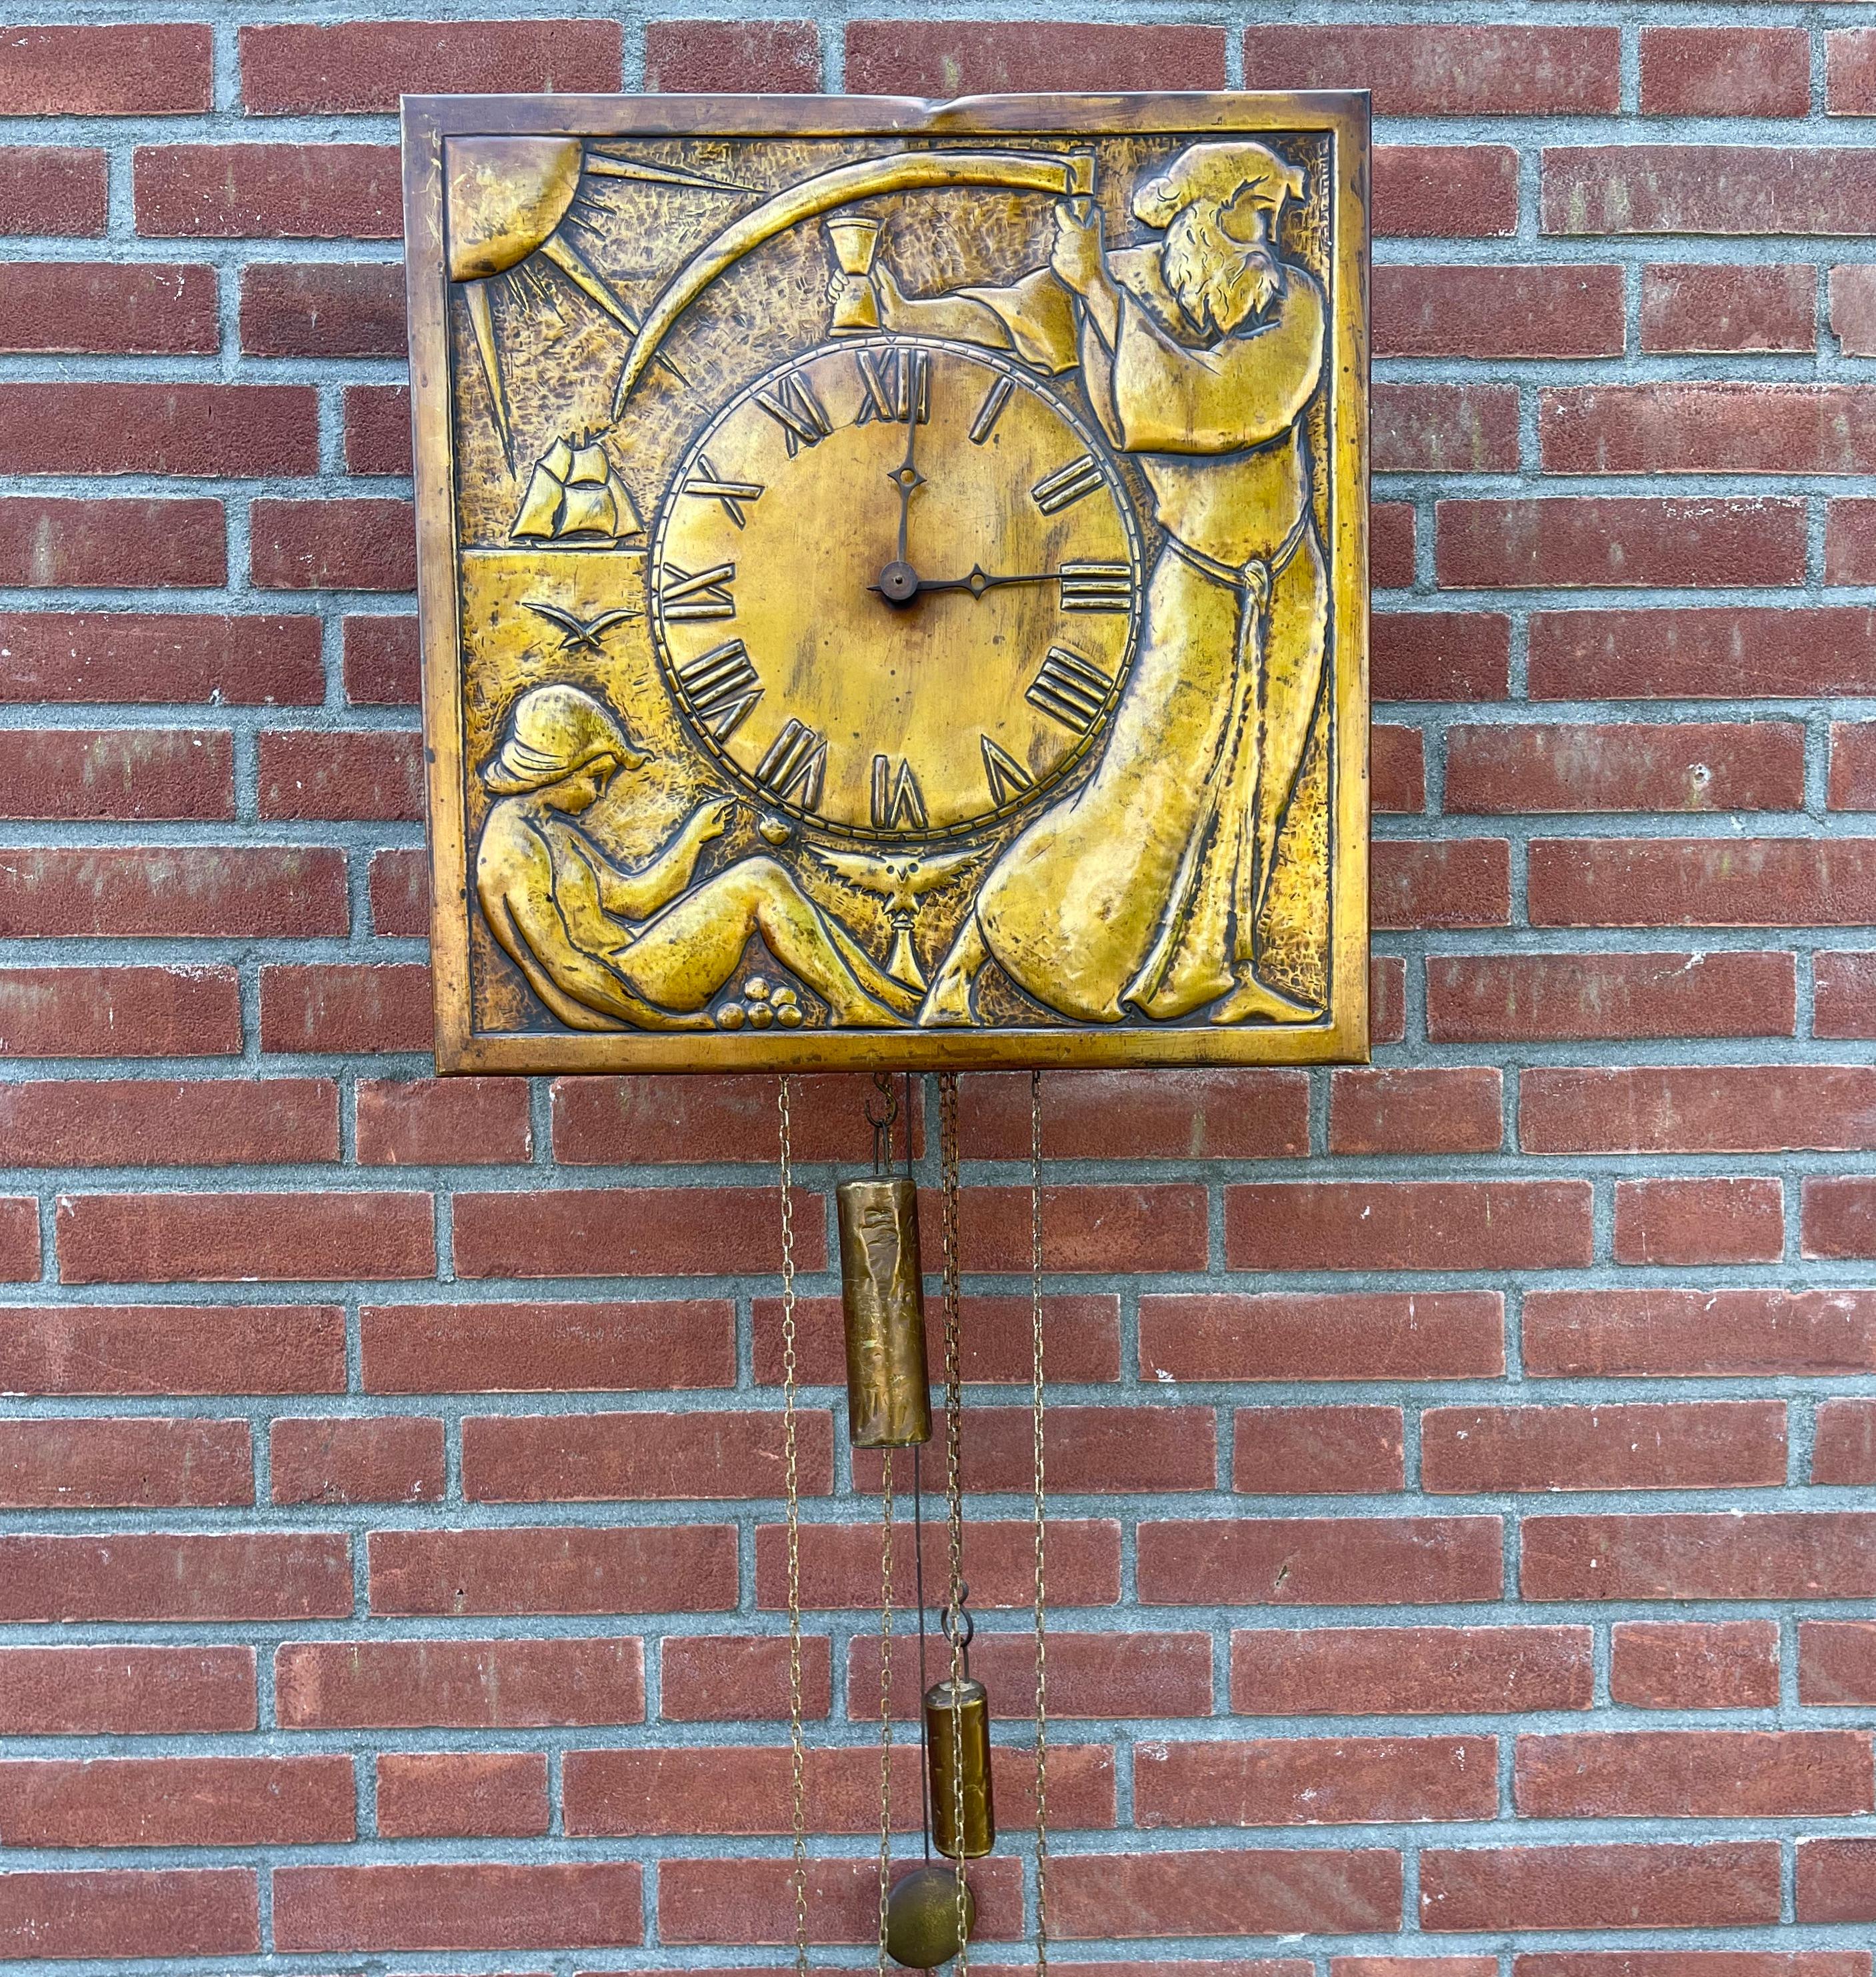 20th Century Unique Arts & Crafts Wall Clock with Stunning Front Plaque Depicting Father Time